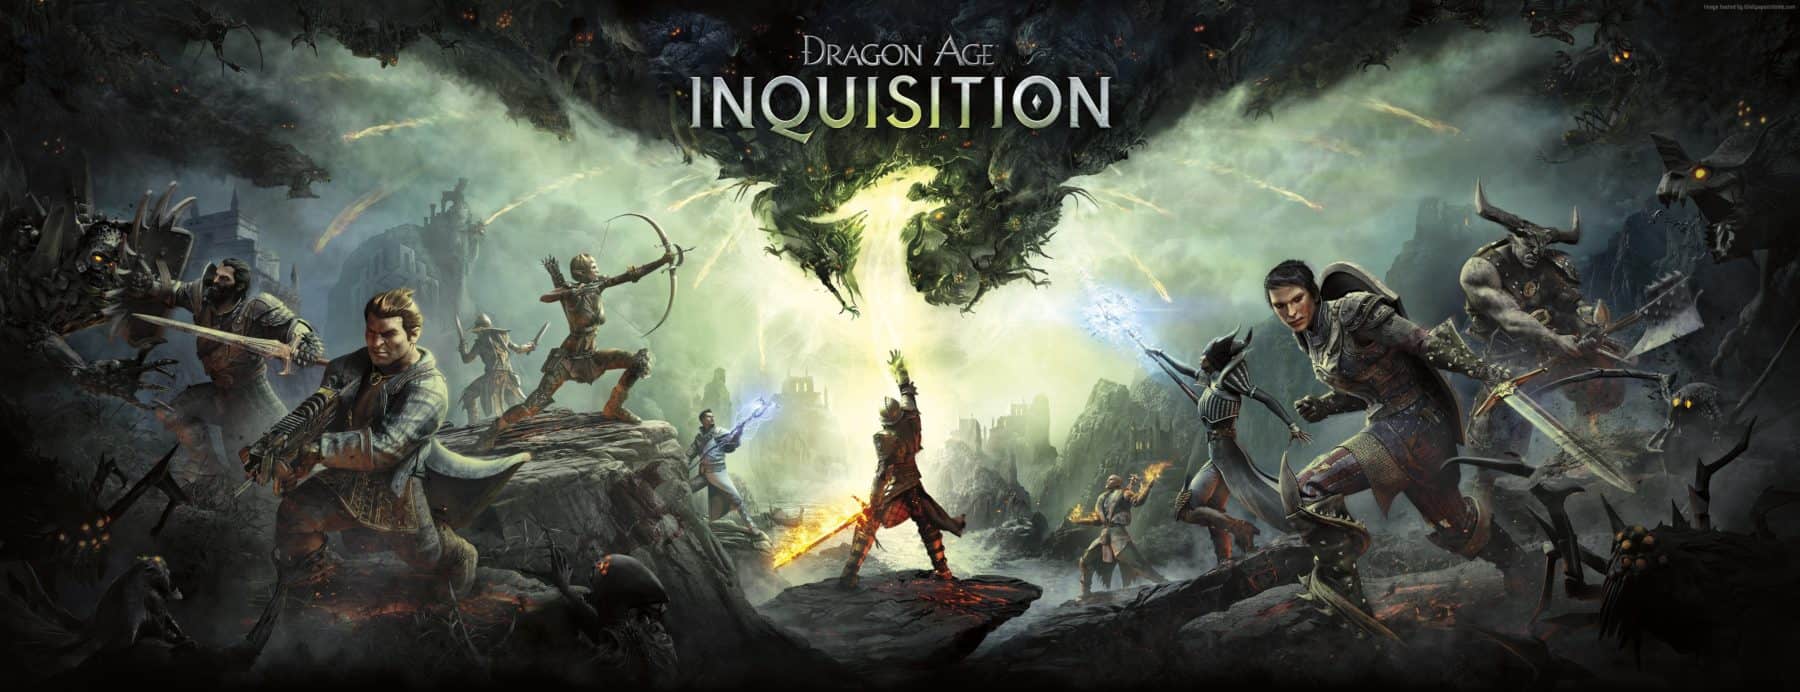 game-review-dragon-age-inquisition-xbox-one-games-brrraaains-a-head-banging-life